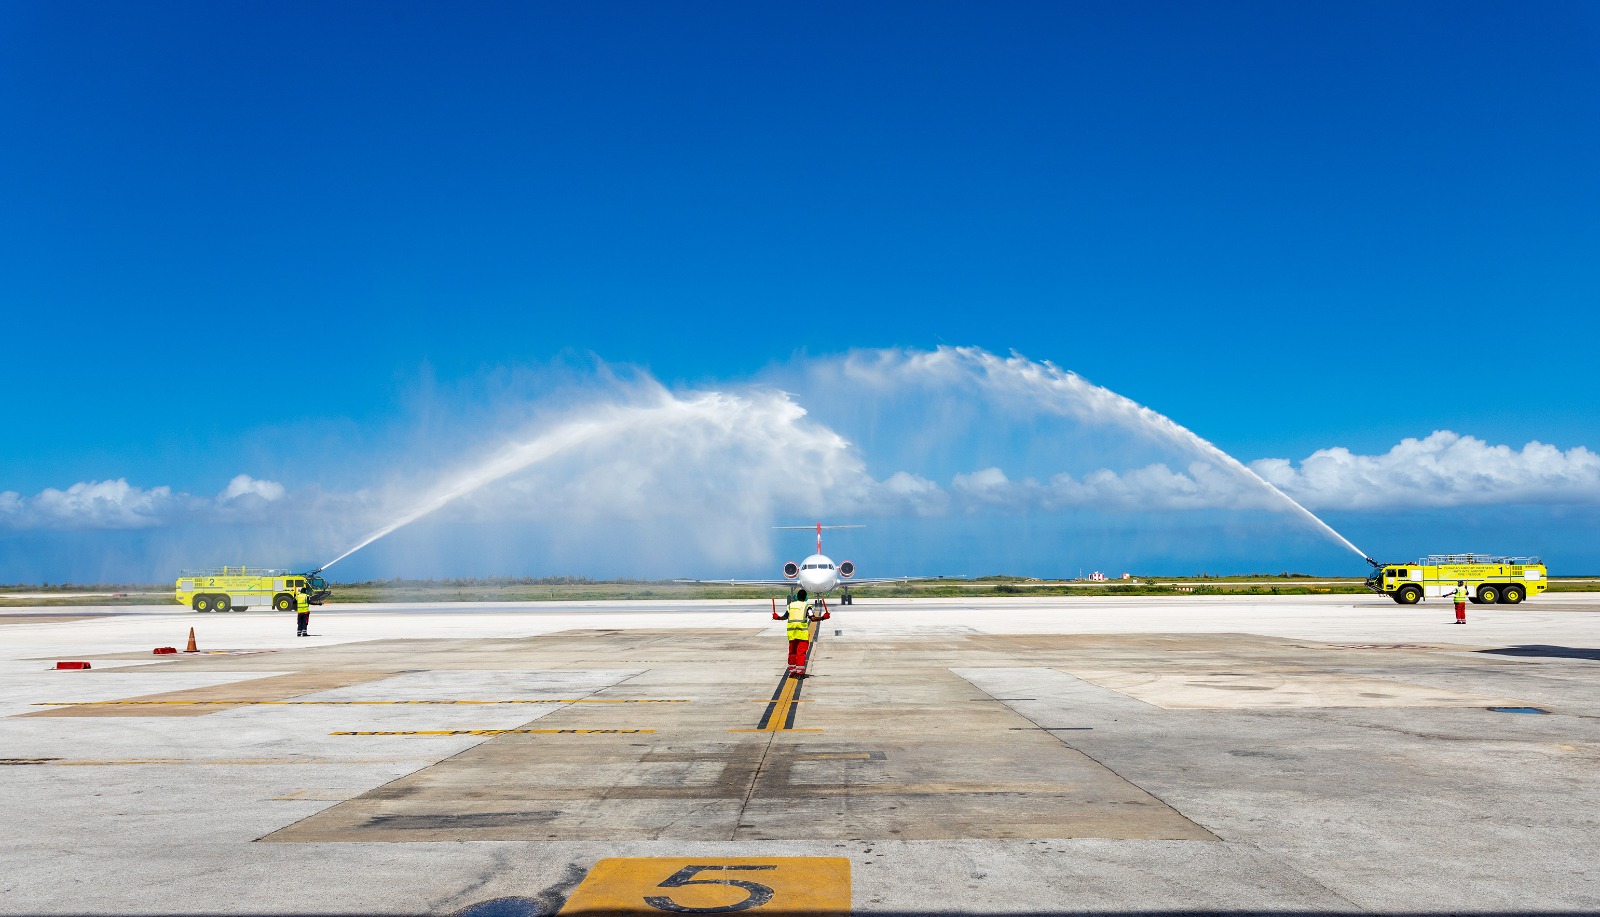 Celebrating Jetair’s inaugural flight on the Curaçao – Medellín route